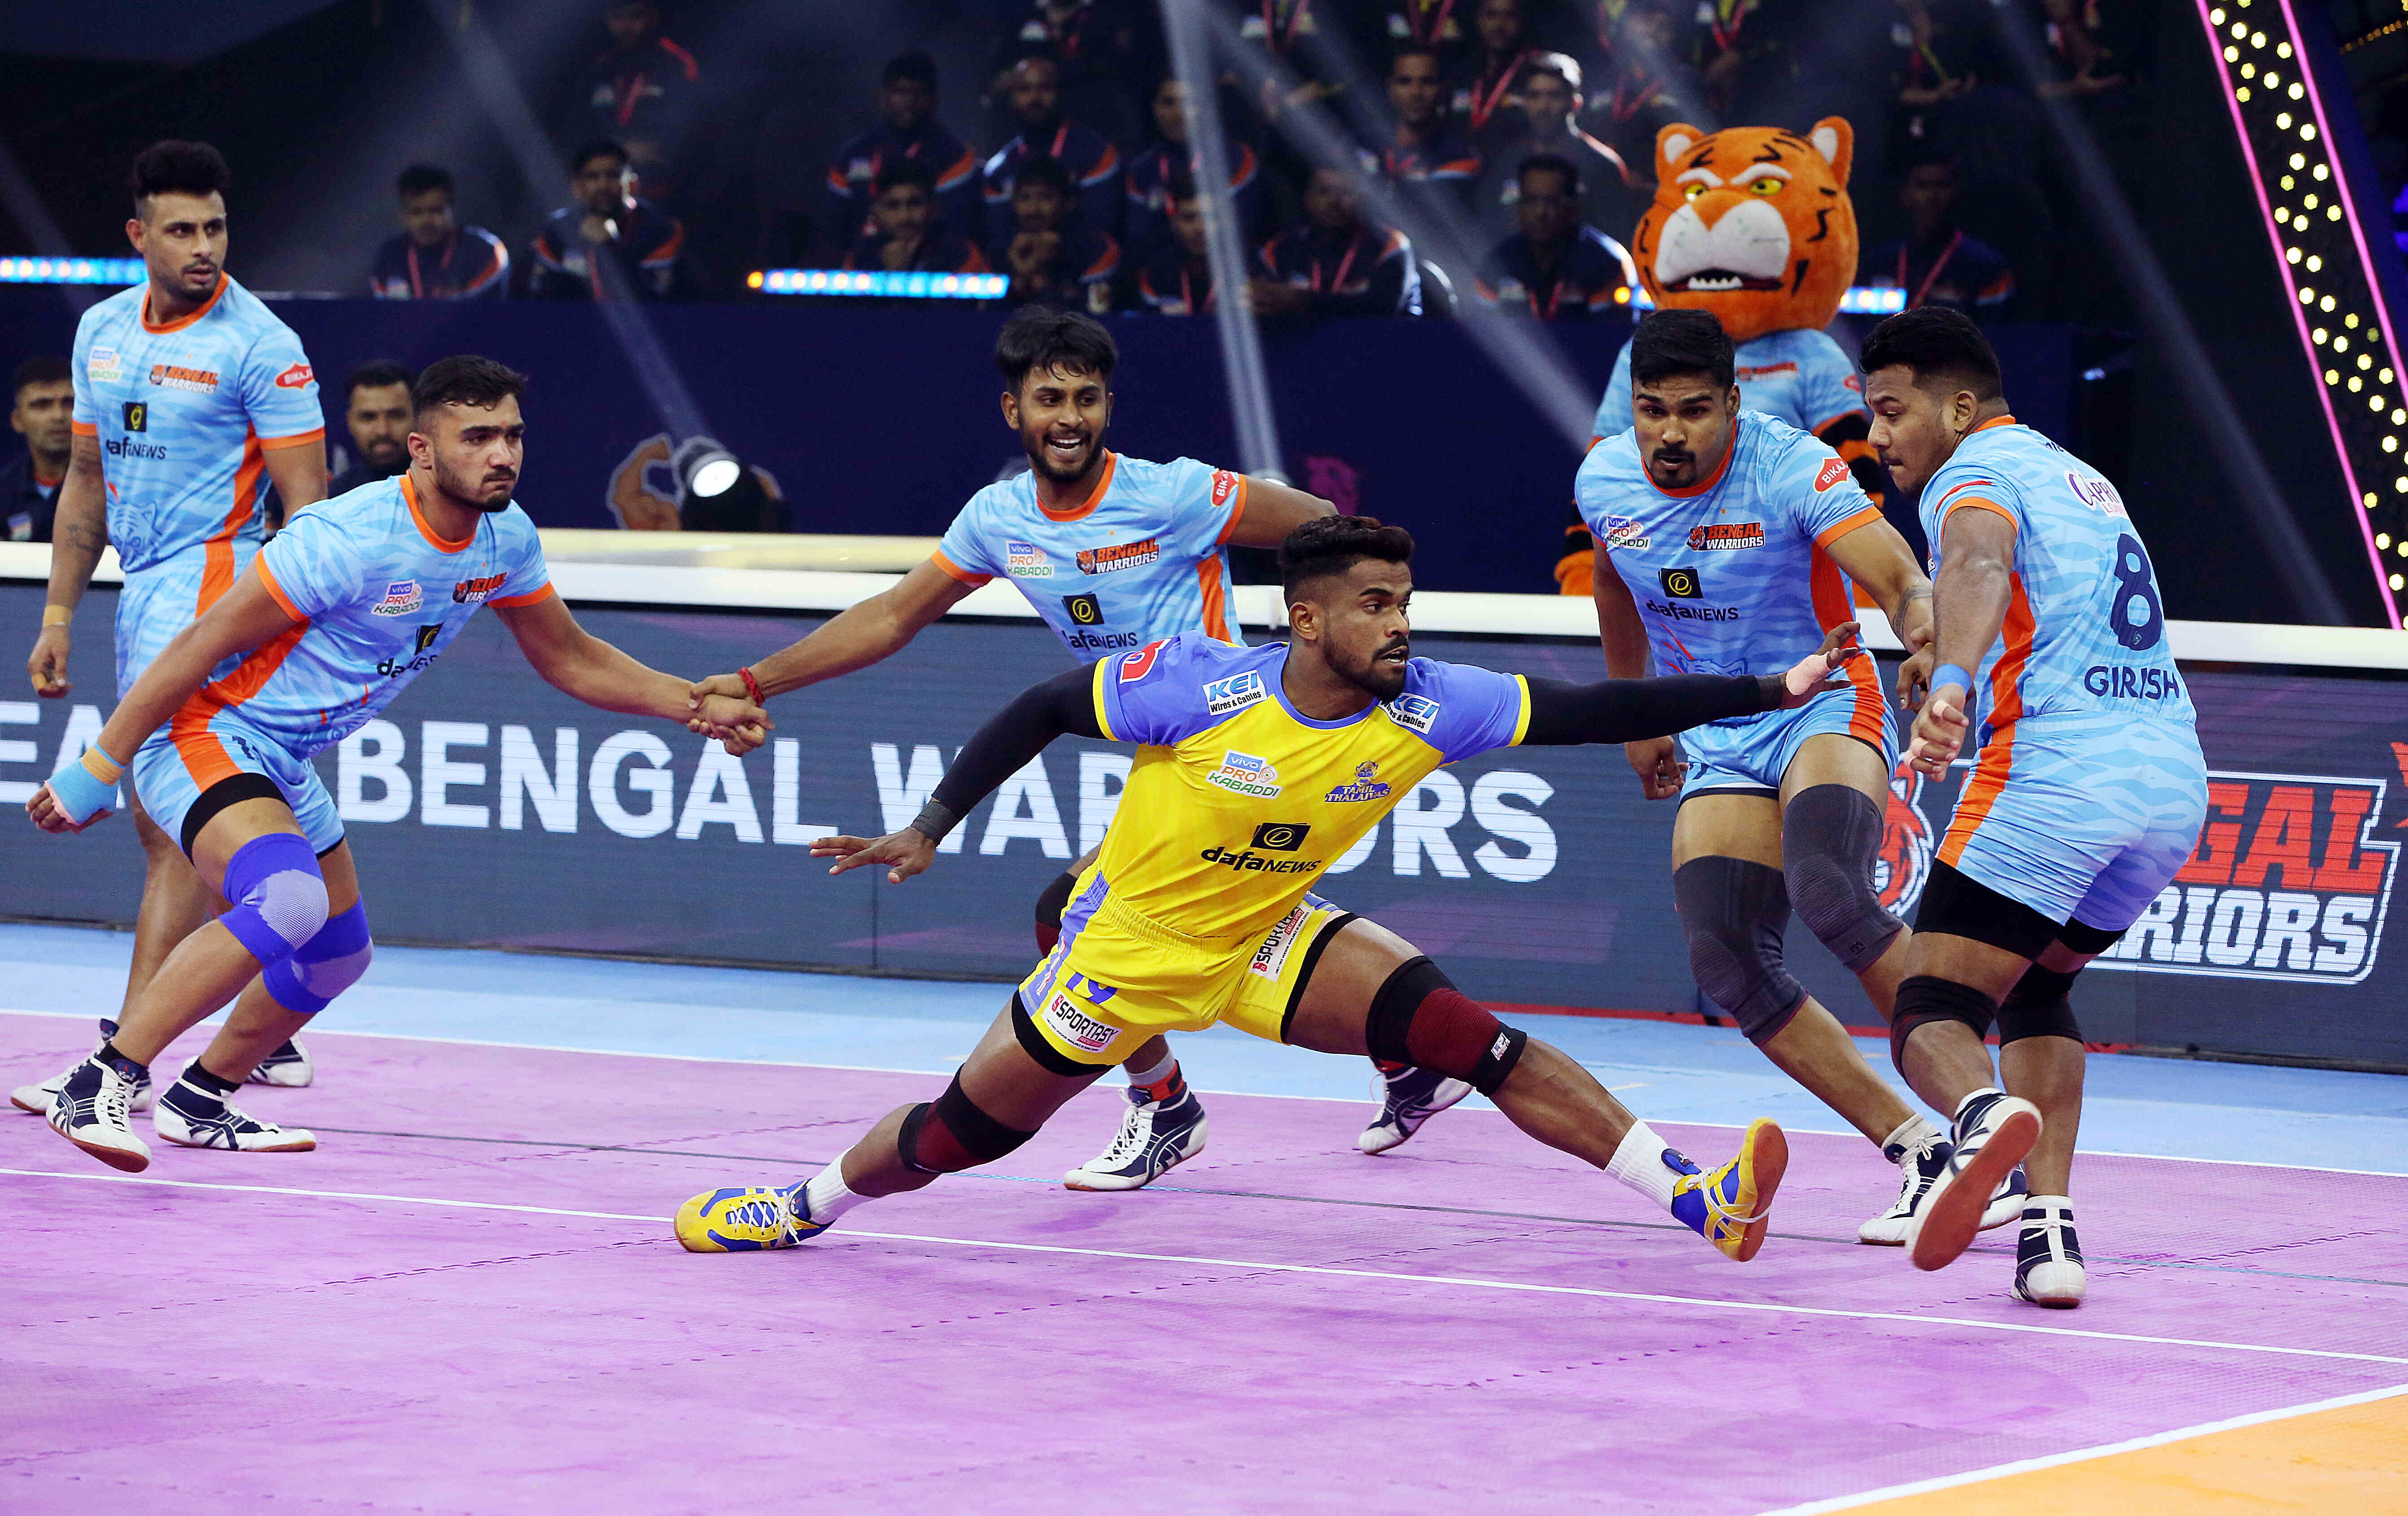 PKL 2022 LIVE: Tamil Thalaivas eye victory against Bengal Warriors, UP Yoddhas look to get back to winning ways, face Gujarat Giants - Follow LIVE updates